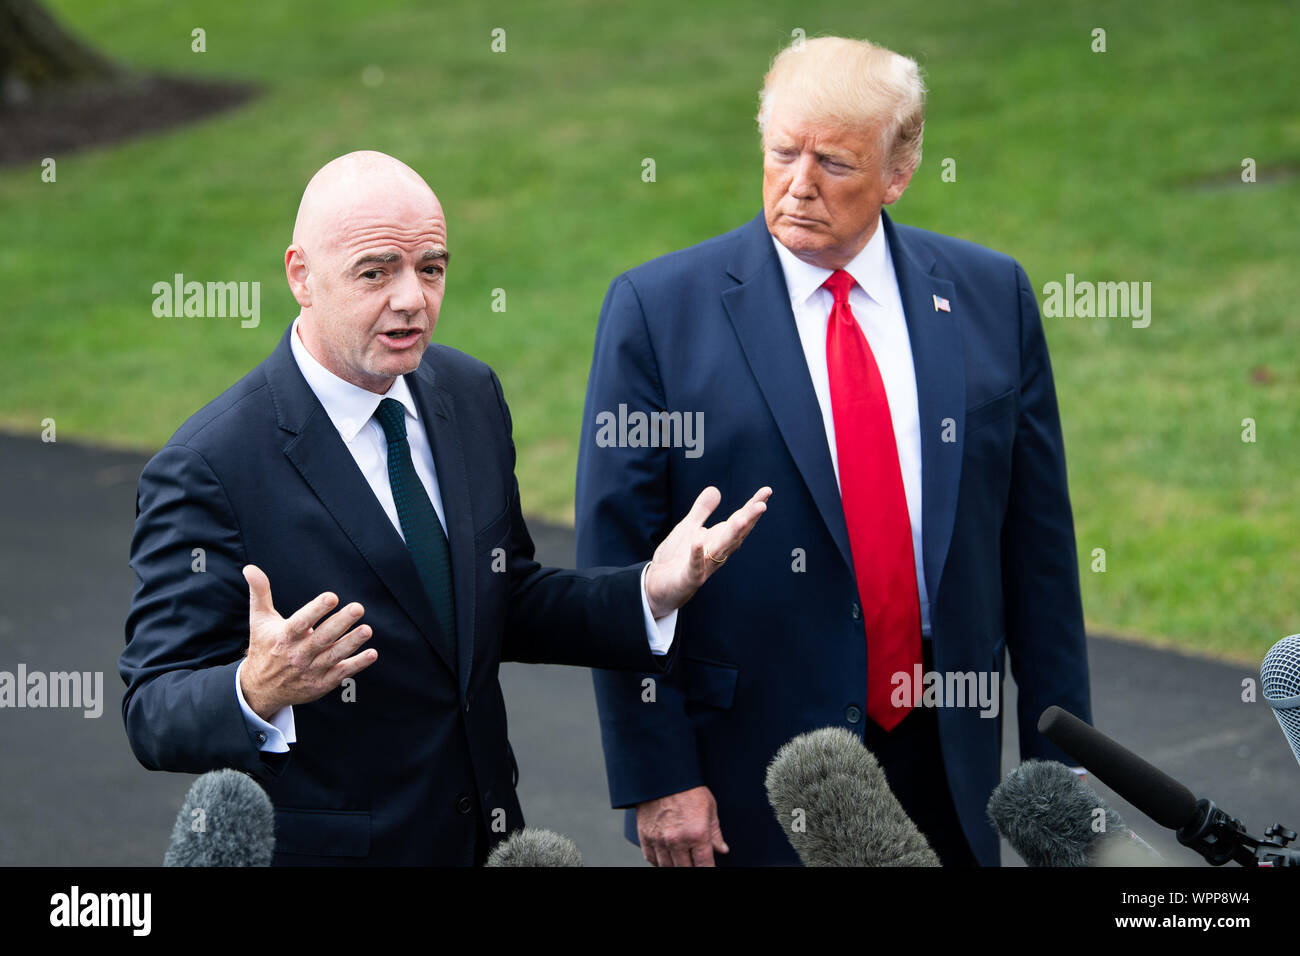 Washington DC, USA. 09th Sep, 2019. President Donald Trump (R) and FIFA President Gianni Infantino speak to the media as Trump departs the White House for a rally in North Carolina, in Washington, DC on Monday, September 9, 2019. Photo by Kevin Dietsch/UPI Credit: UPI/Alamy Live News Stock Photo